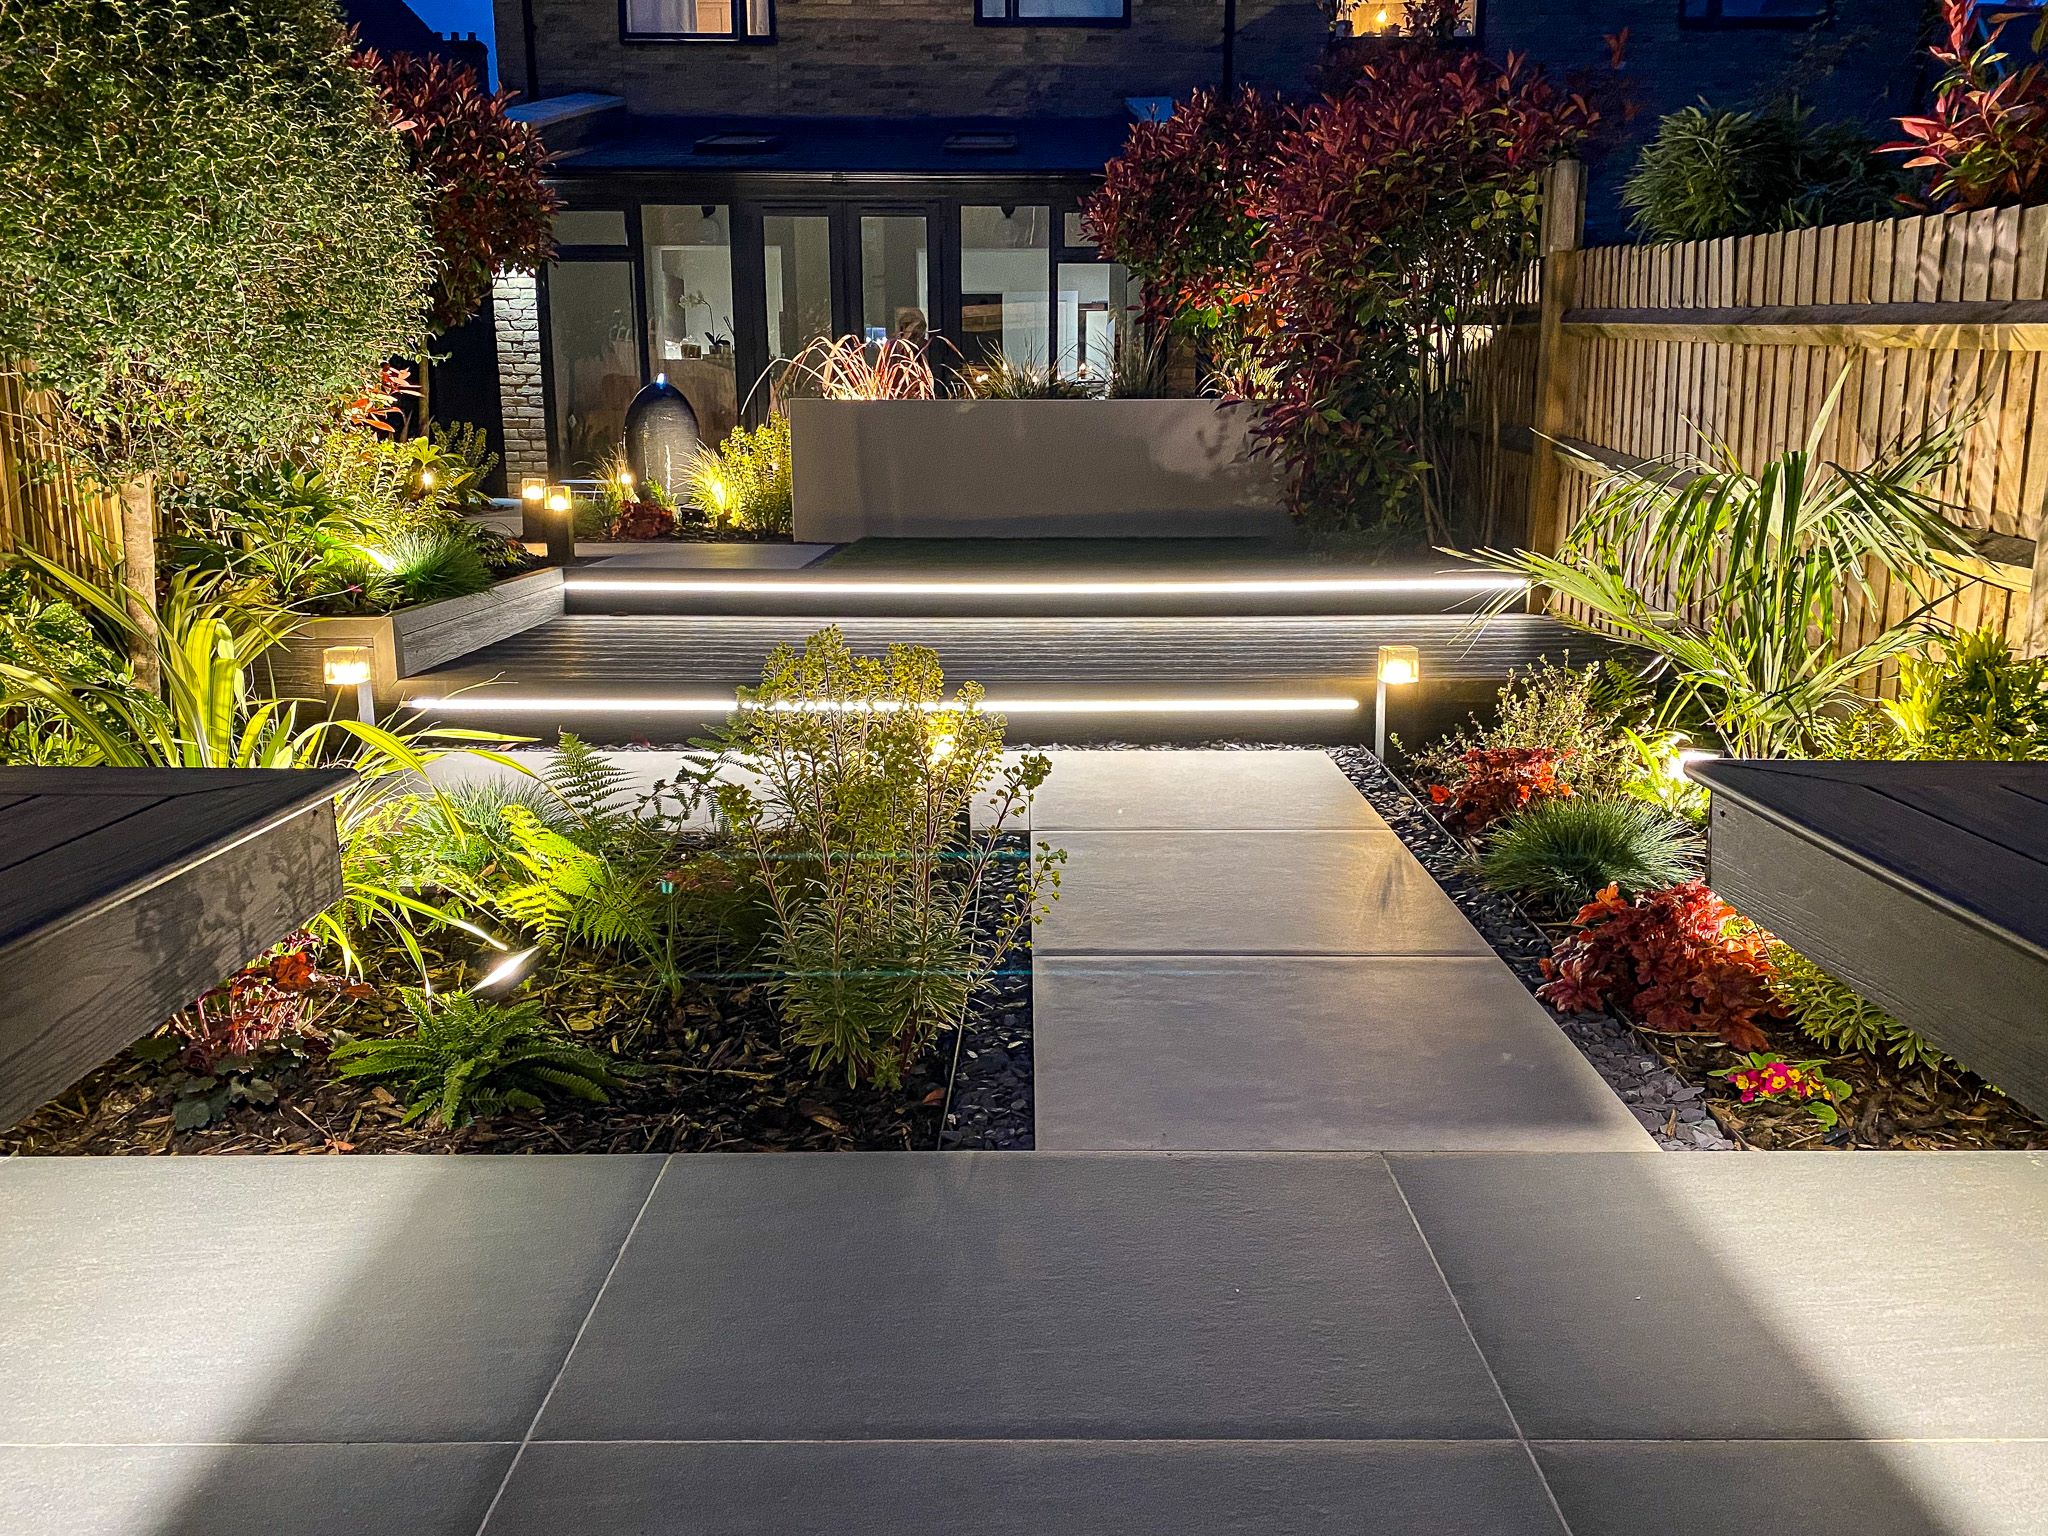 New build garden design in Mill Hill, designed by a Crystal Palace garden designer